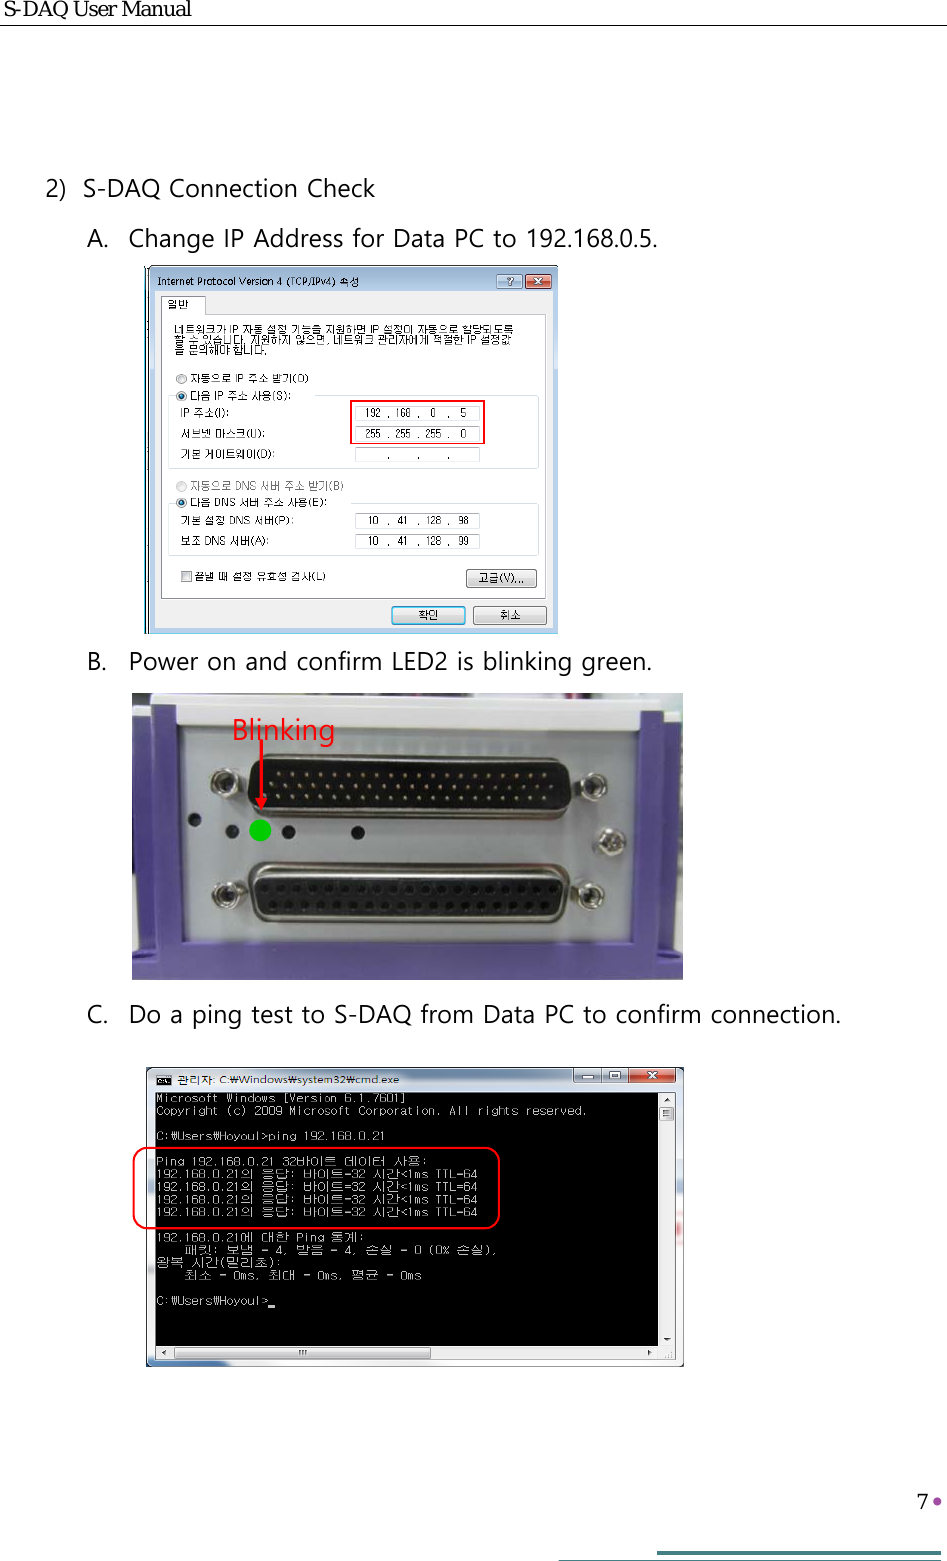 S-DAQ User Manual   7     Blinking  2) S-DAQ Connection Check A. Change IP Address for Data PC to 192.168.0.5.      B. Power on and confirm LED2 is blinking green.     C. Do a ping test to S-DAQ from Data PC to confirm connection.      